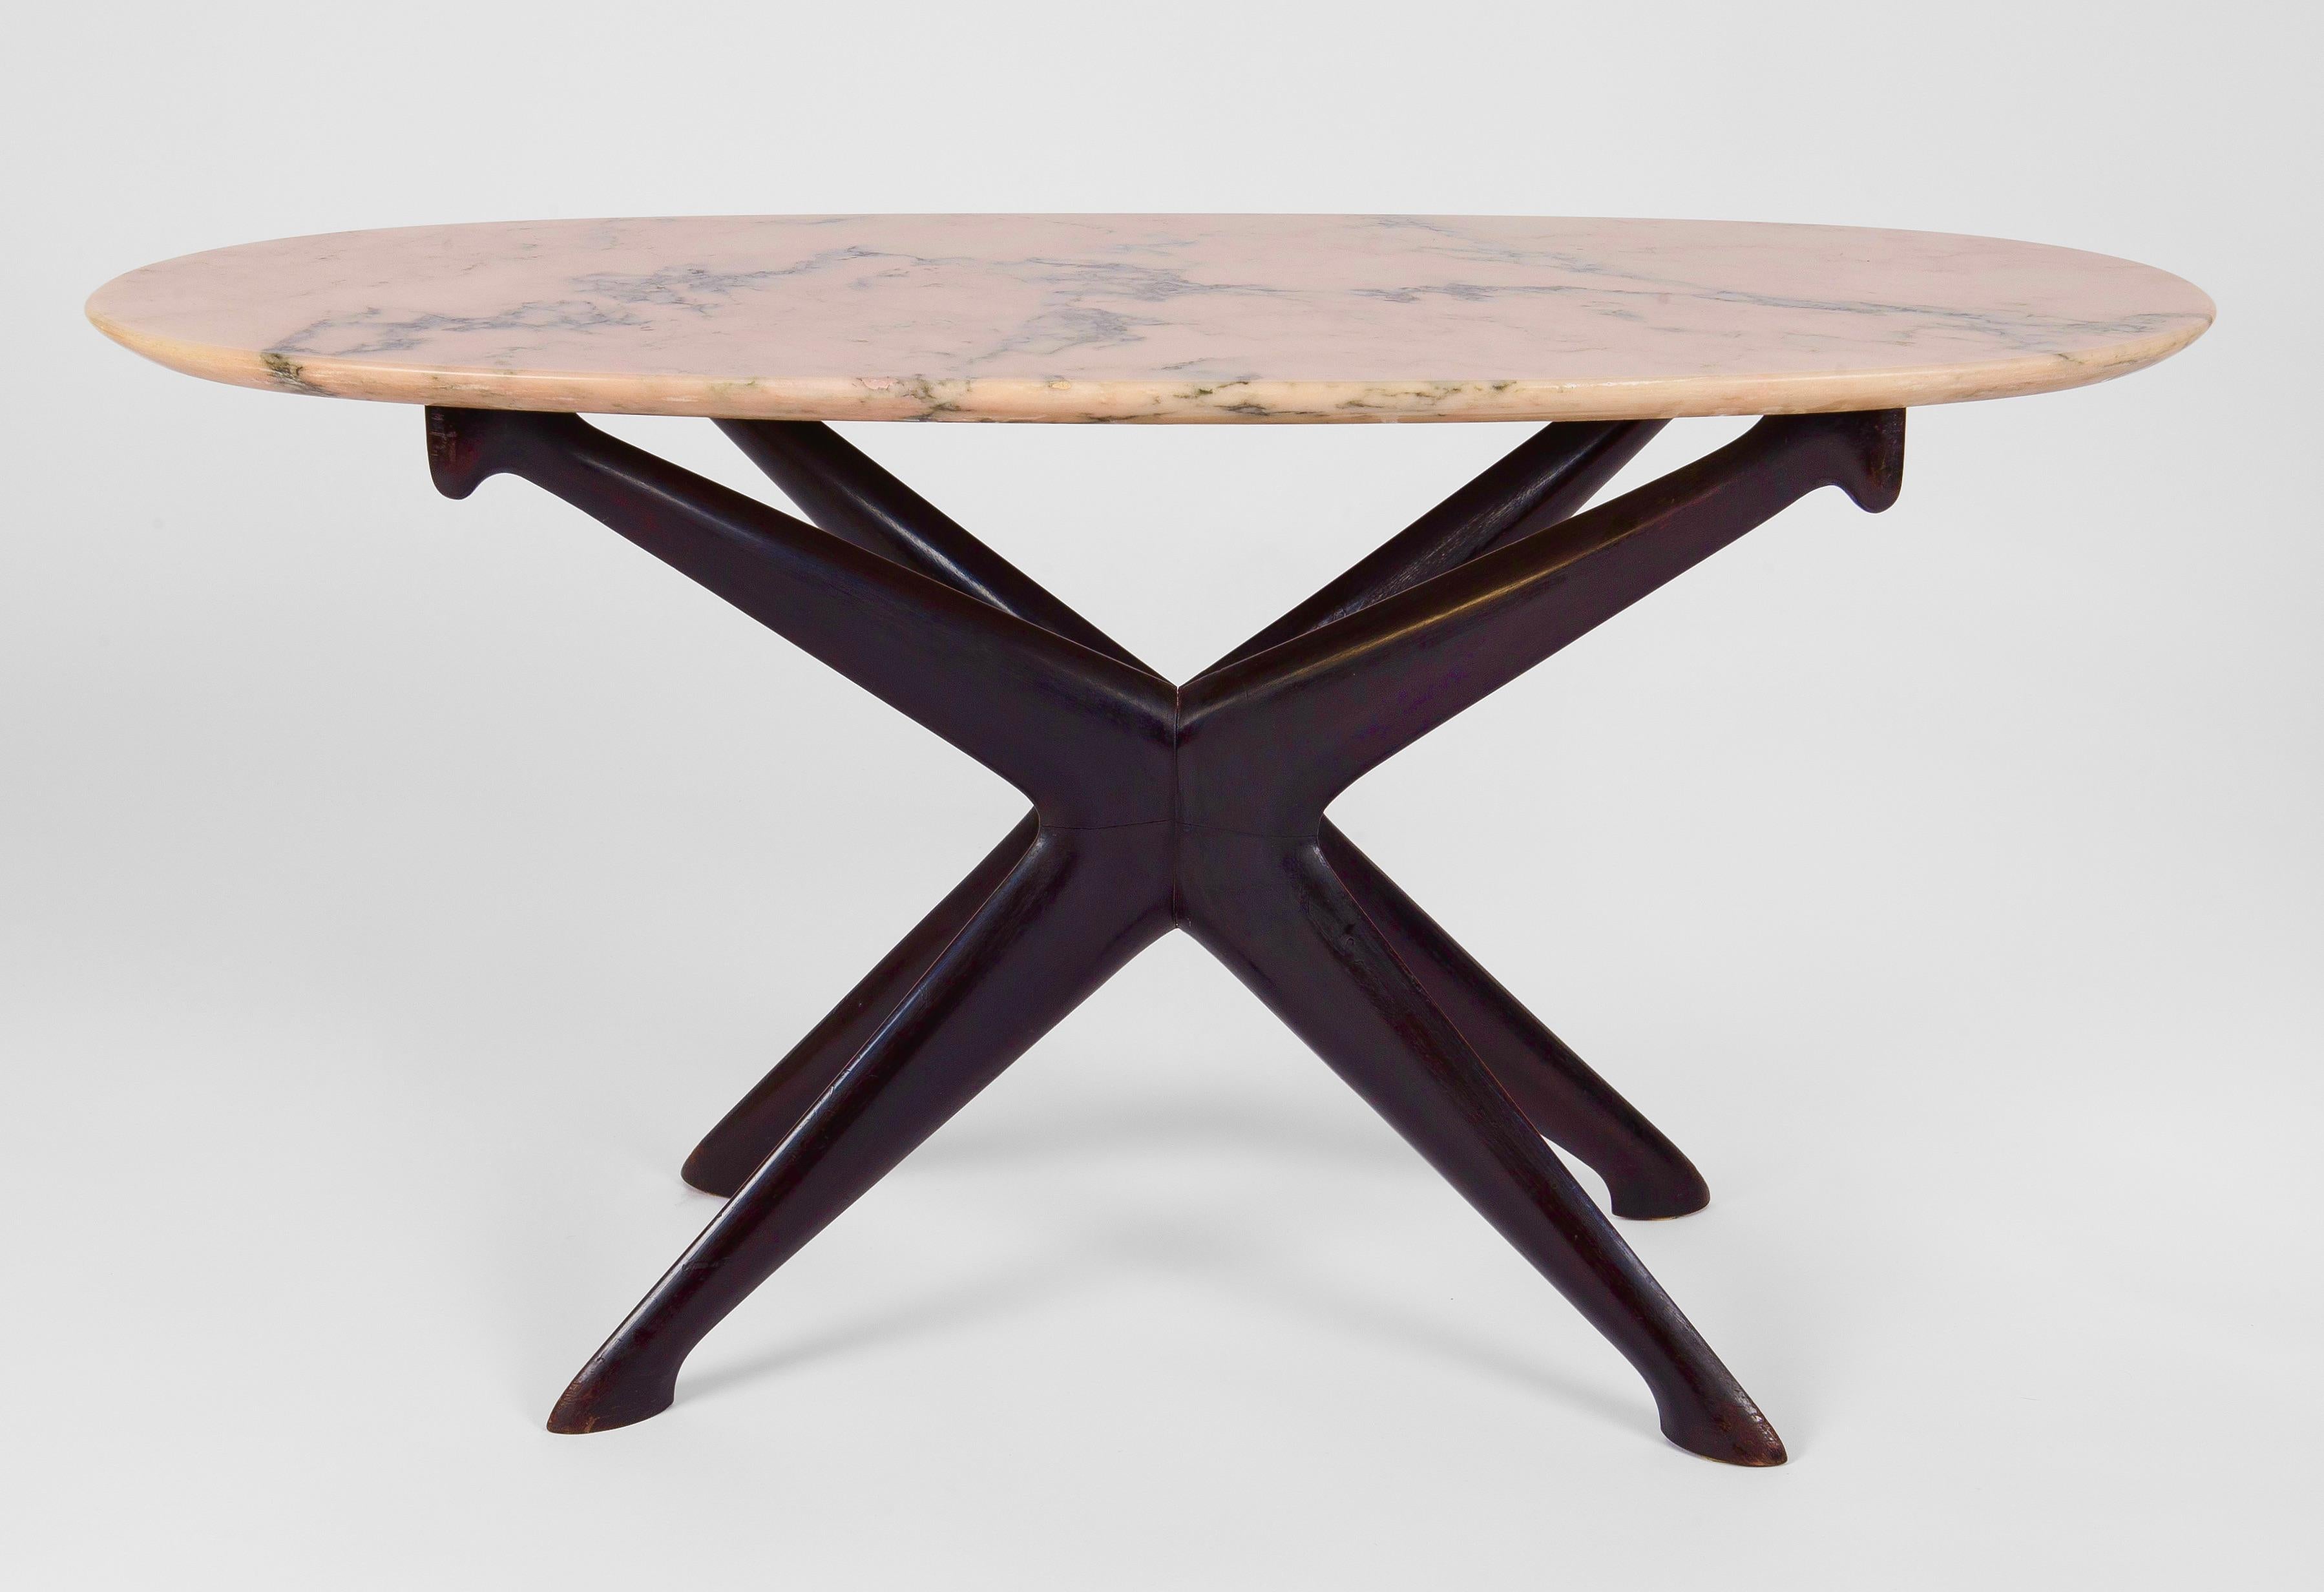 Italian Wood and Marble Coffee Table by Ico Parisi for Fratelli Rizzi, Italy, c.1950